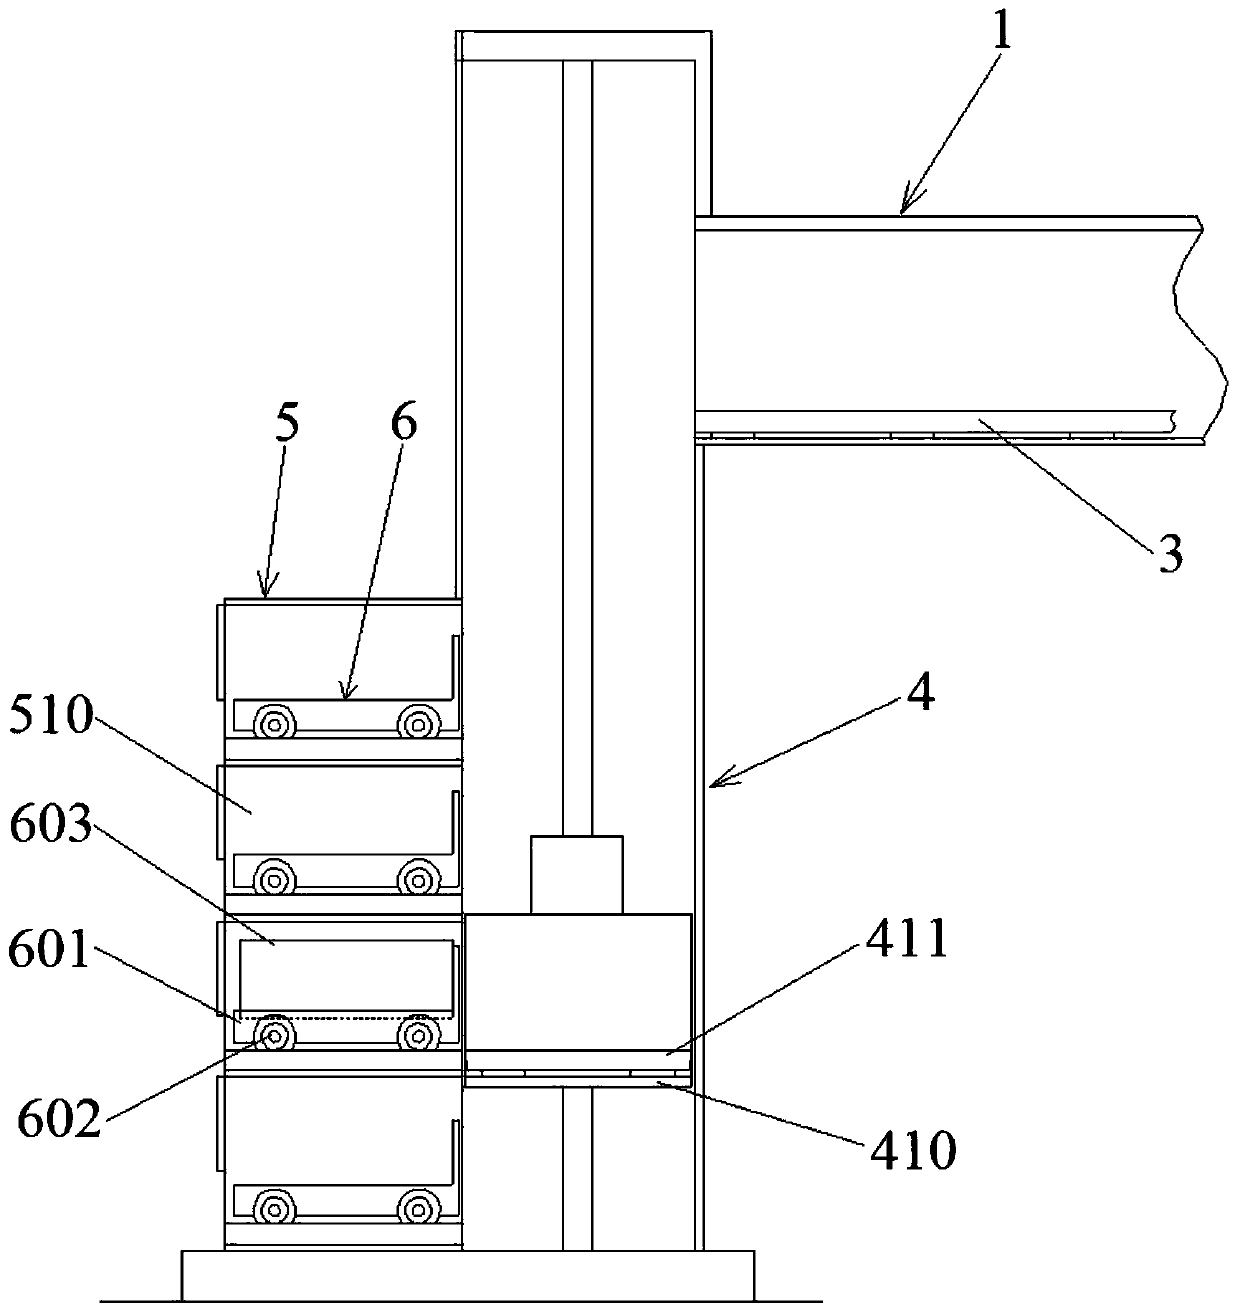 Midway conveying system and method for urban express goods